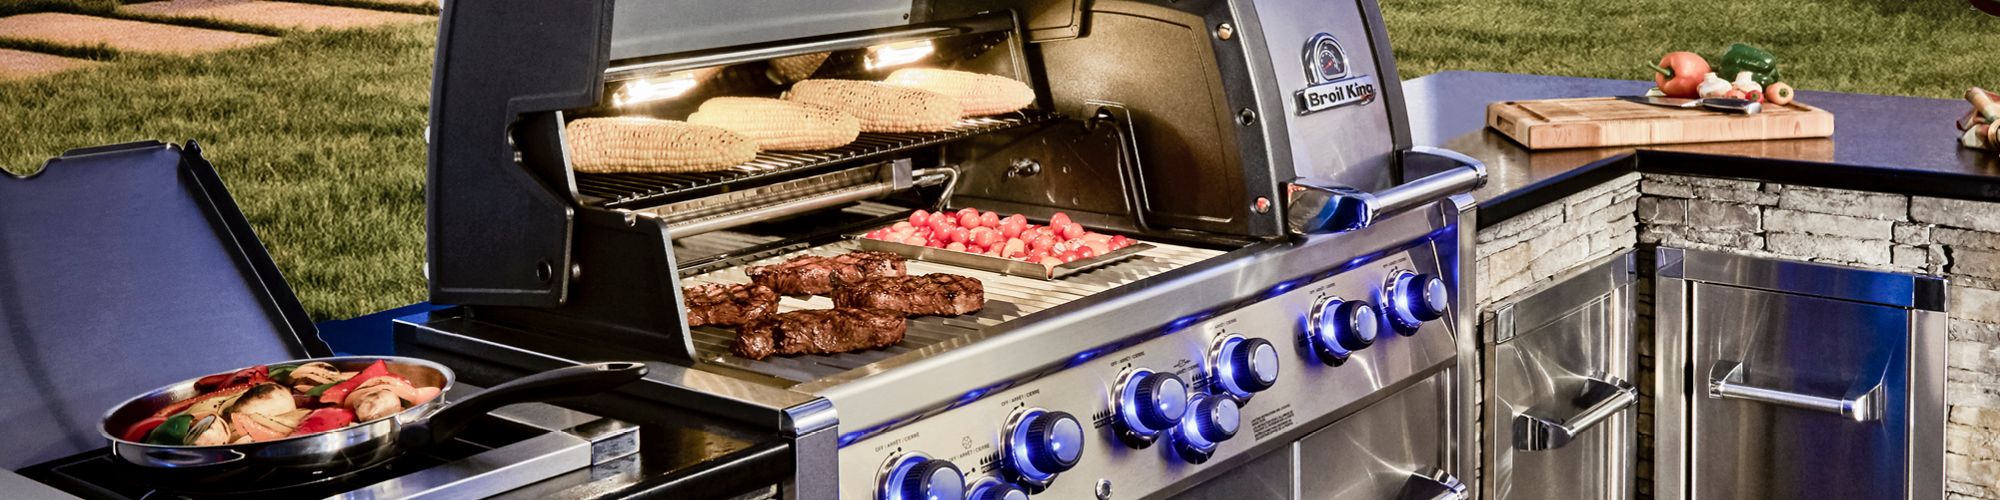 barbecue-a-gas-broil-king-xls-690.jpg